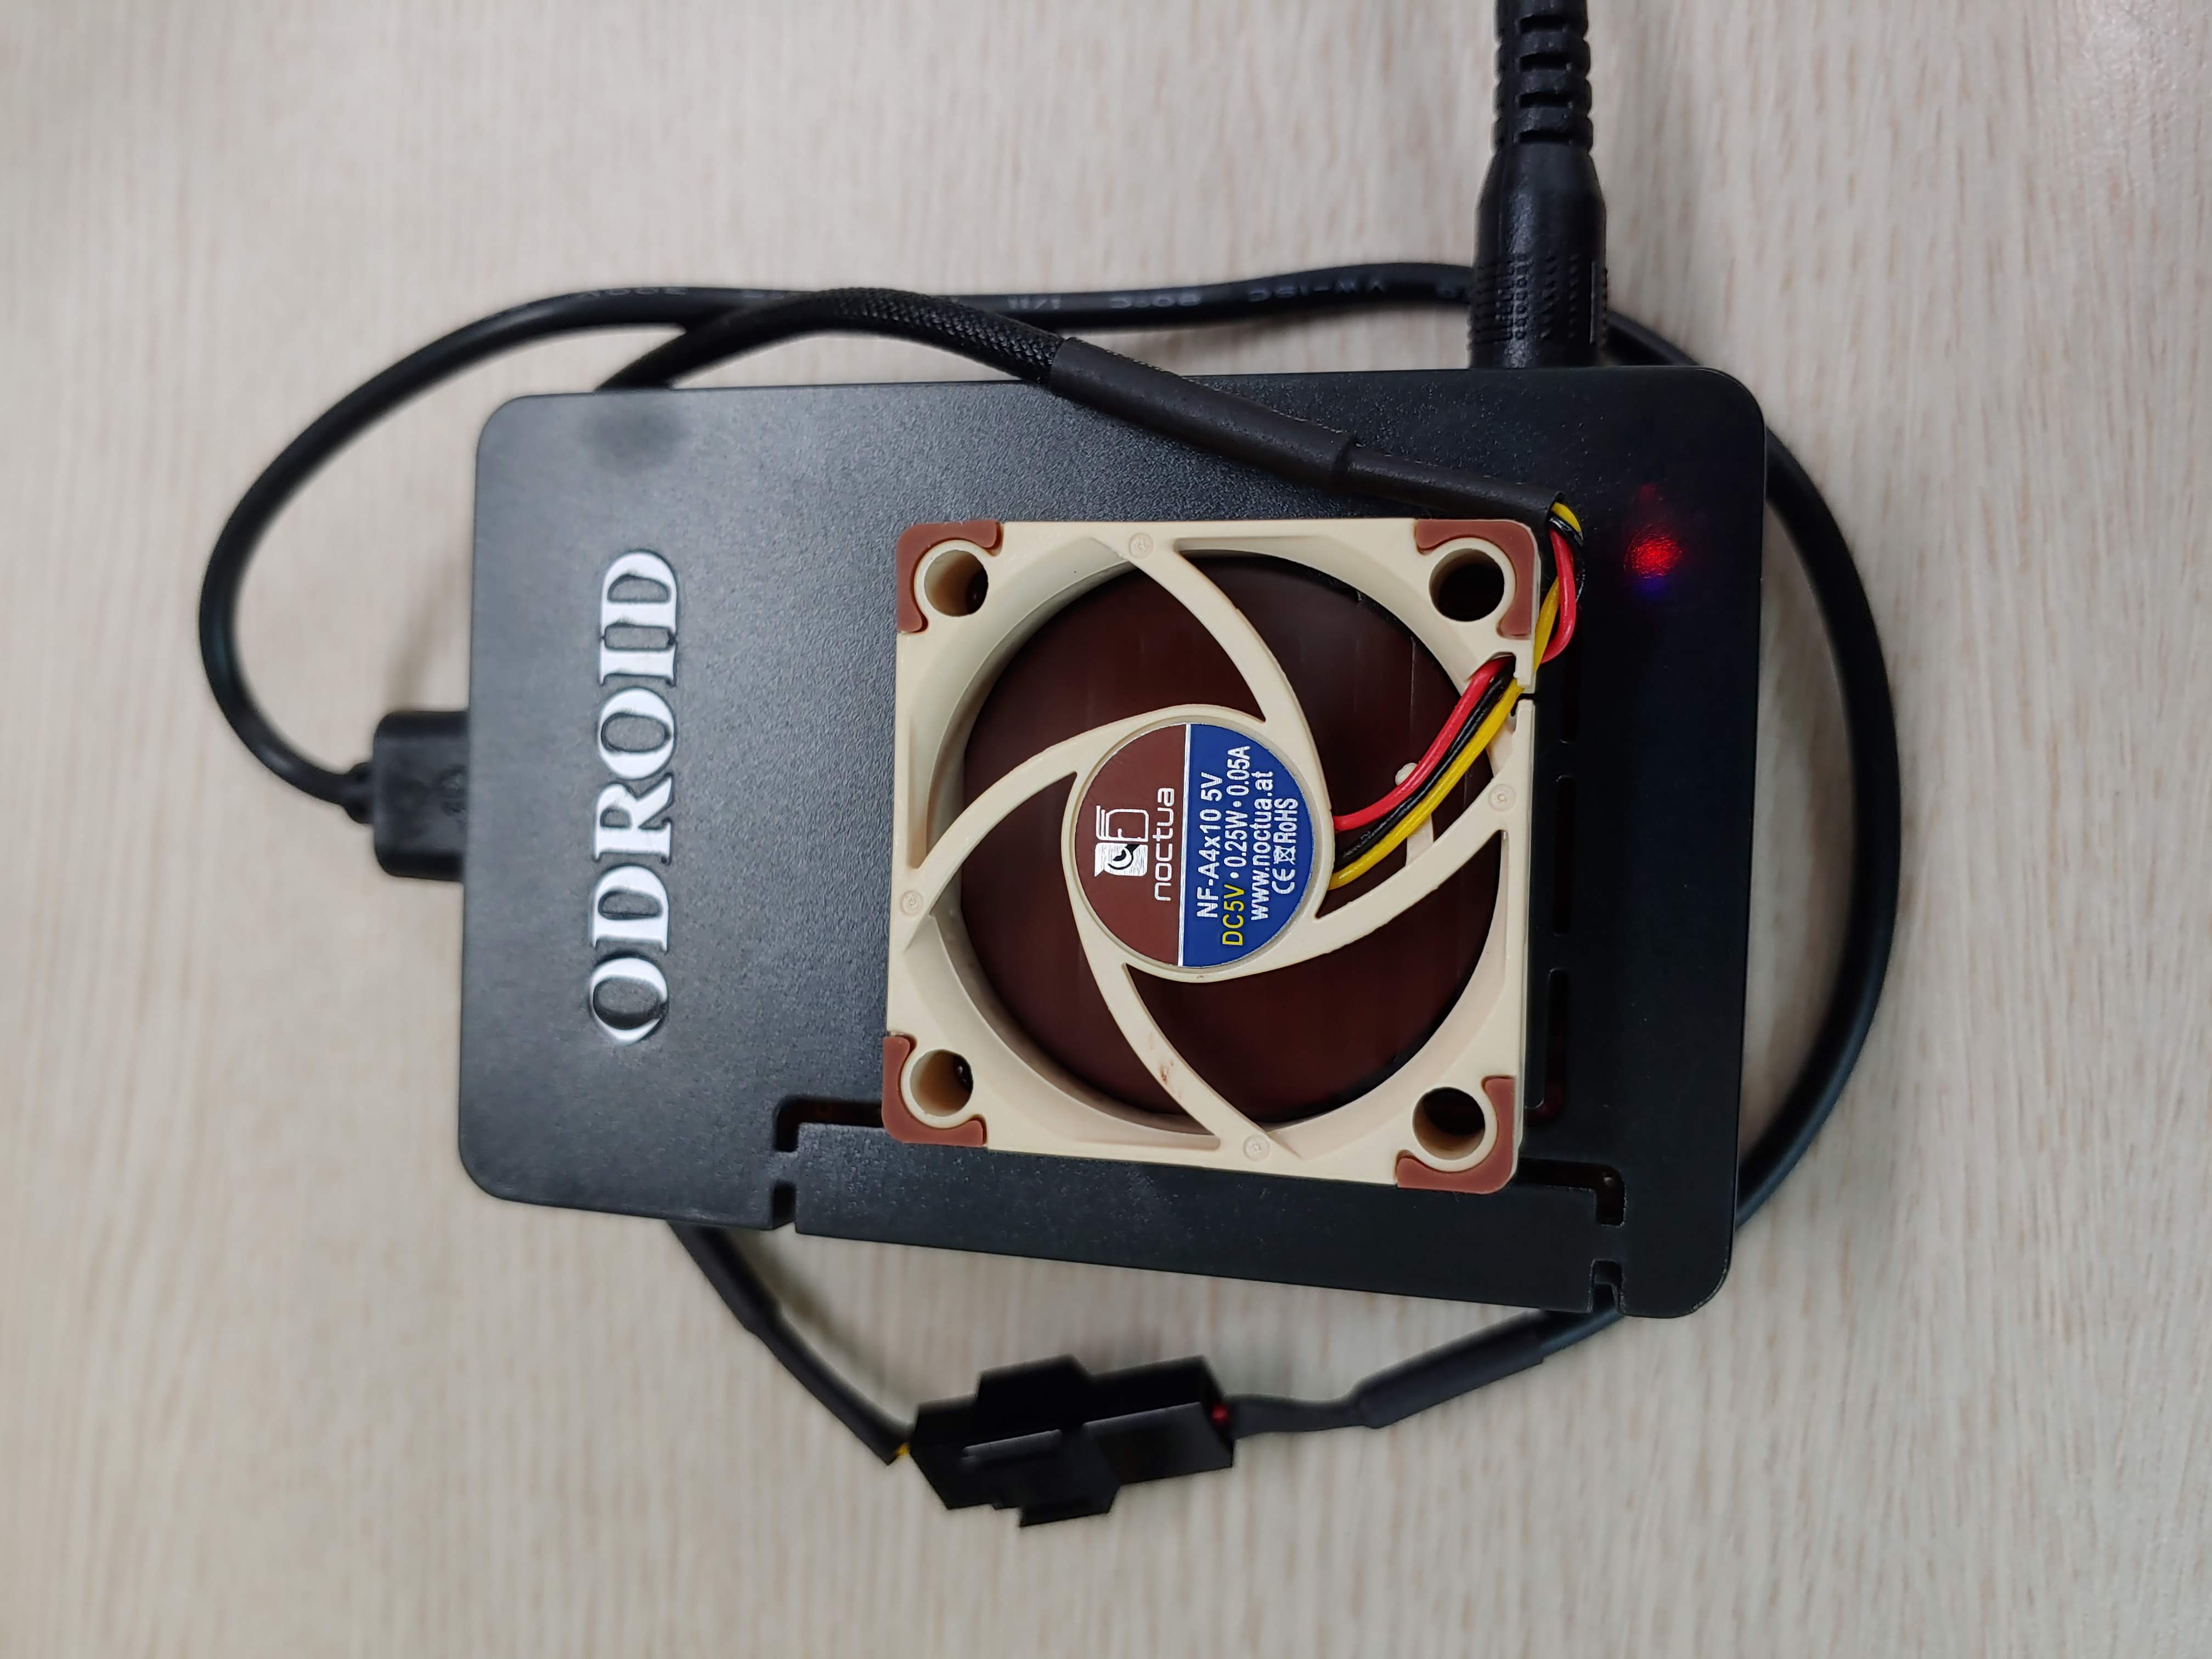 Odroid C4 with Noctua NF-A4x10 5V PWM cooling fan